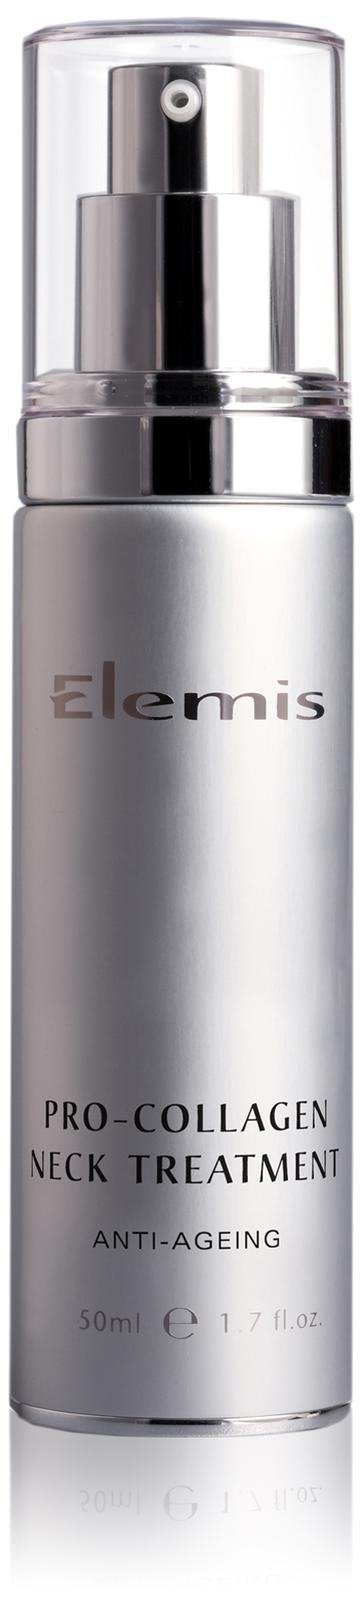 Elemis Pro-collagen Collection Lifting Treatment Neck And Bust